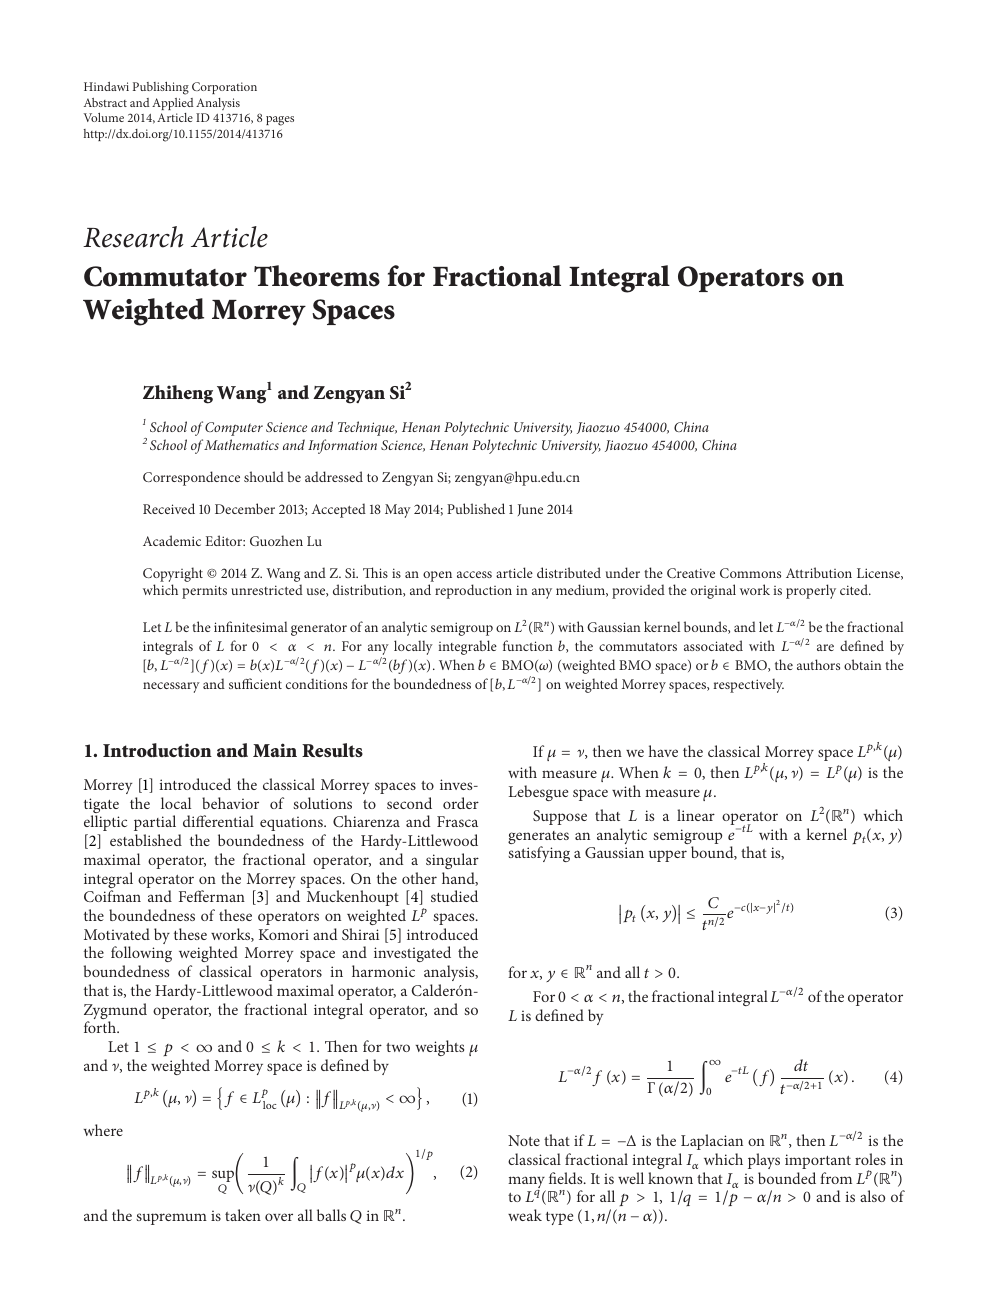 Commutator Theorems For Fractional Integral Operators On Weighted Morrey Spaces Topic Of Research Paper In Mathematics Download Scholarly Article Pdf And Read For Free On Cyberleninka Open Science Hub